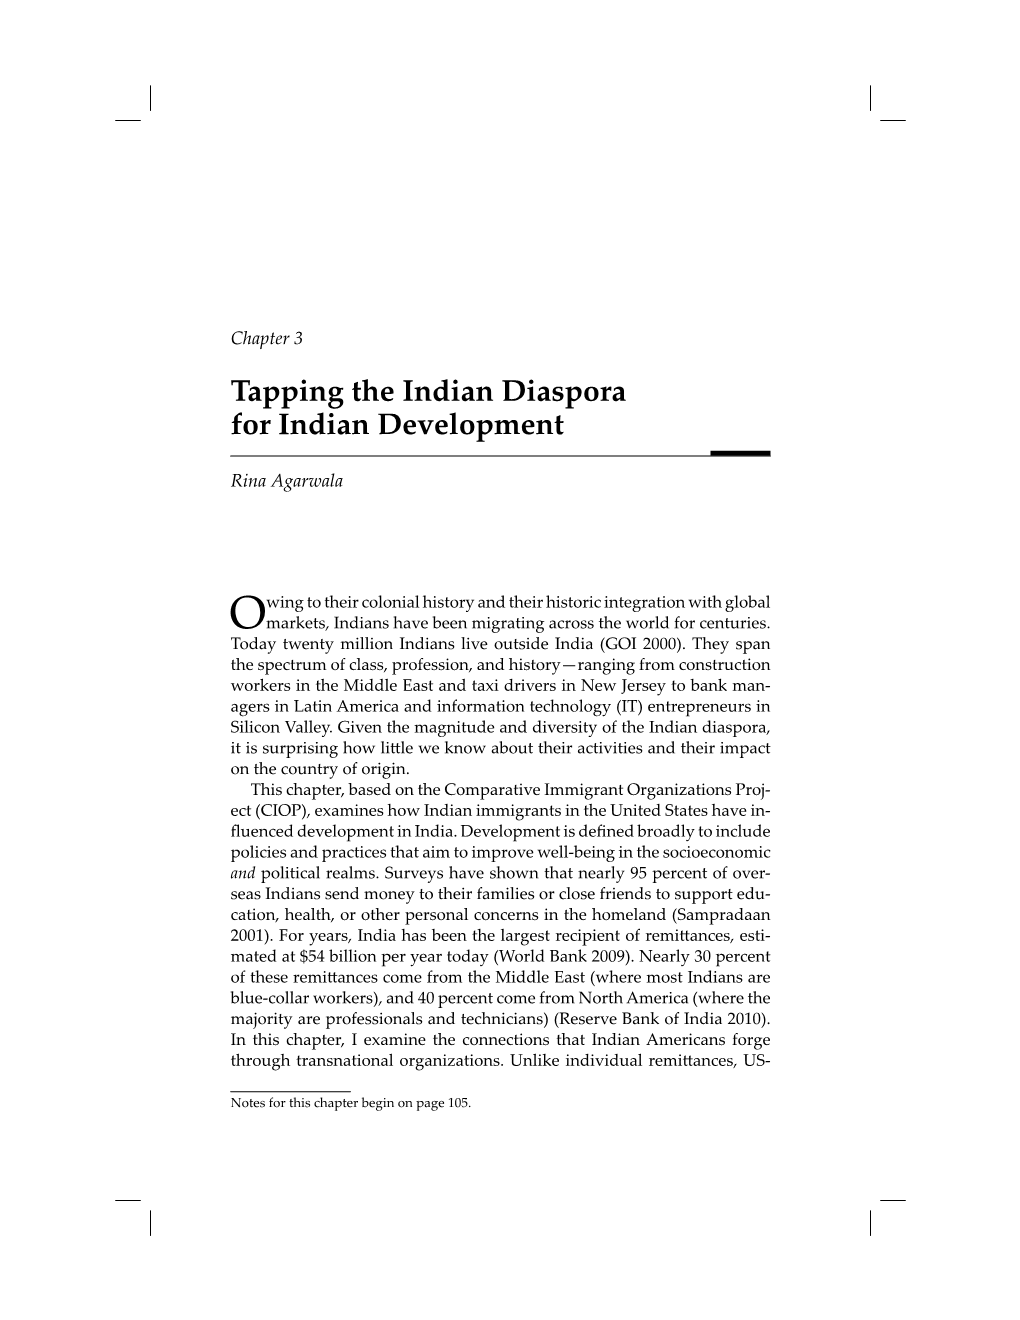 Tapping the Indian Diaspora for Indian Development